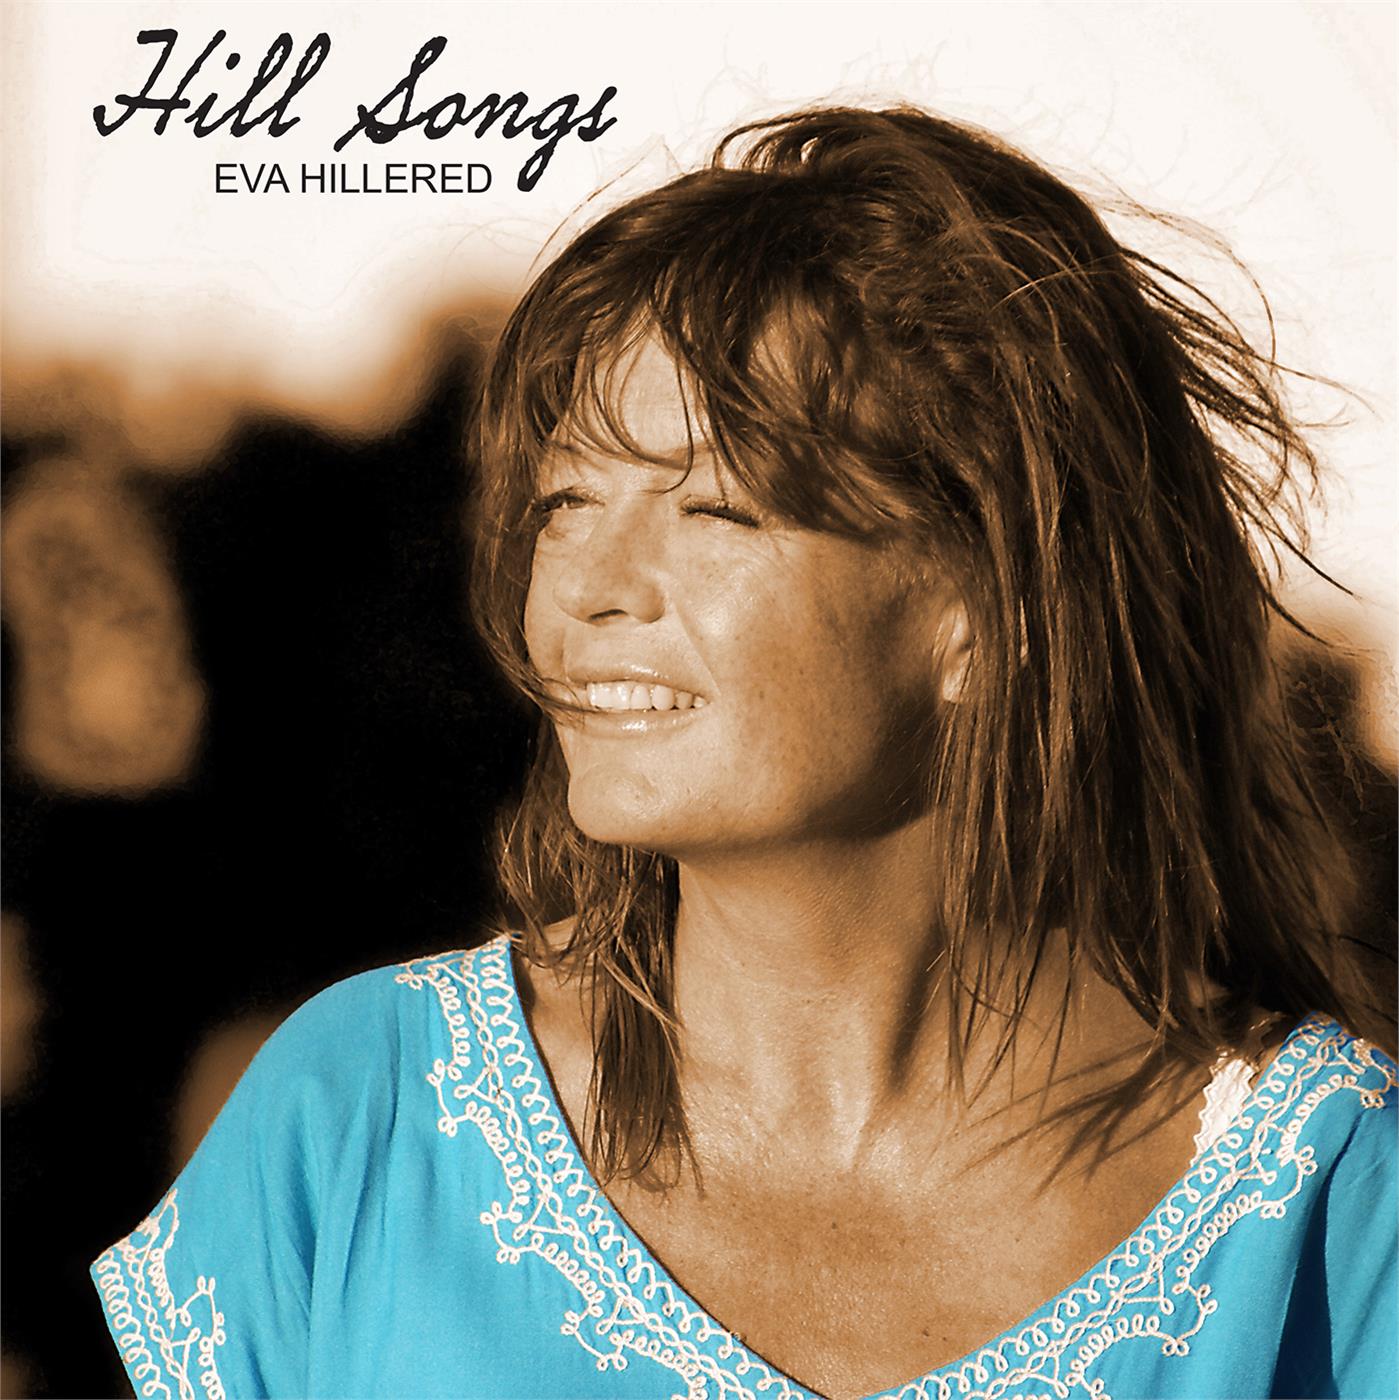 Hill Songs